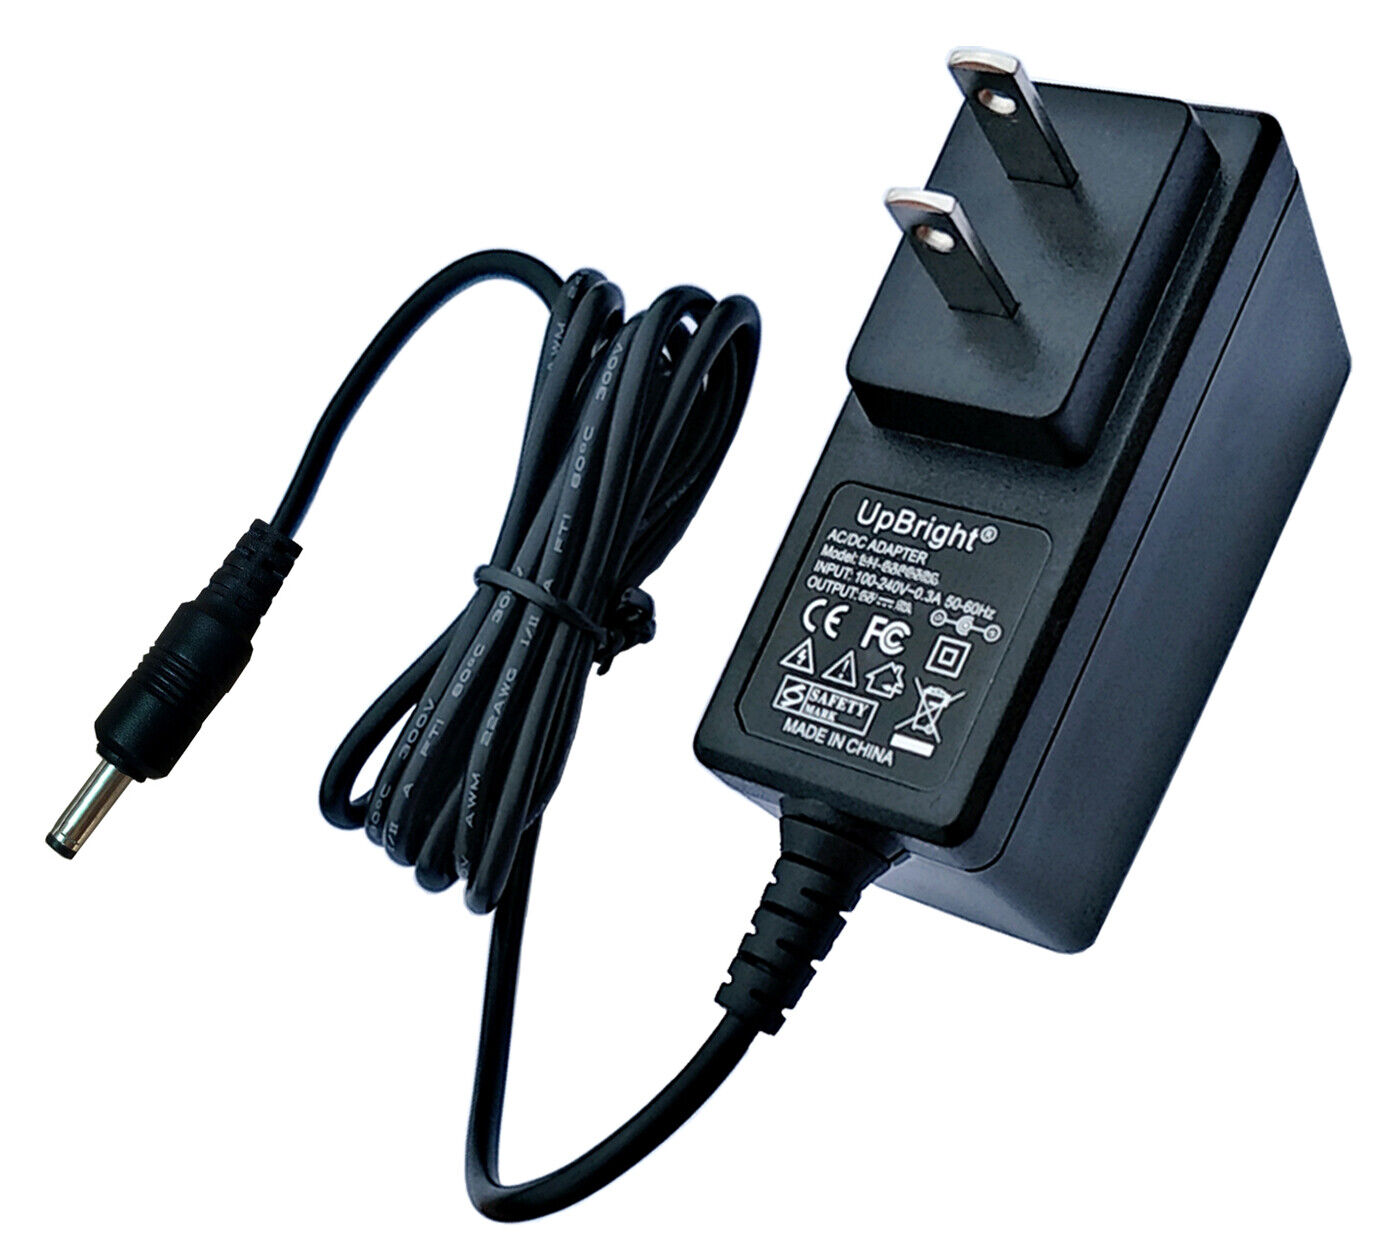 5V AC Power Adapter or USB Cable For Coby DP700 DP702 DP1052 Digital Photo Frame